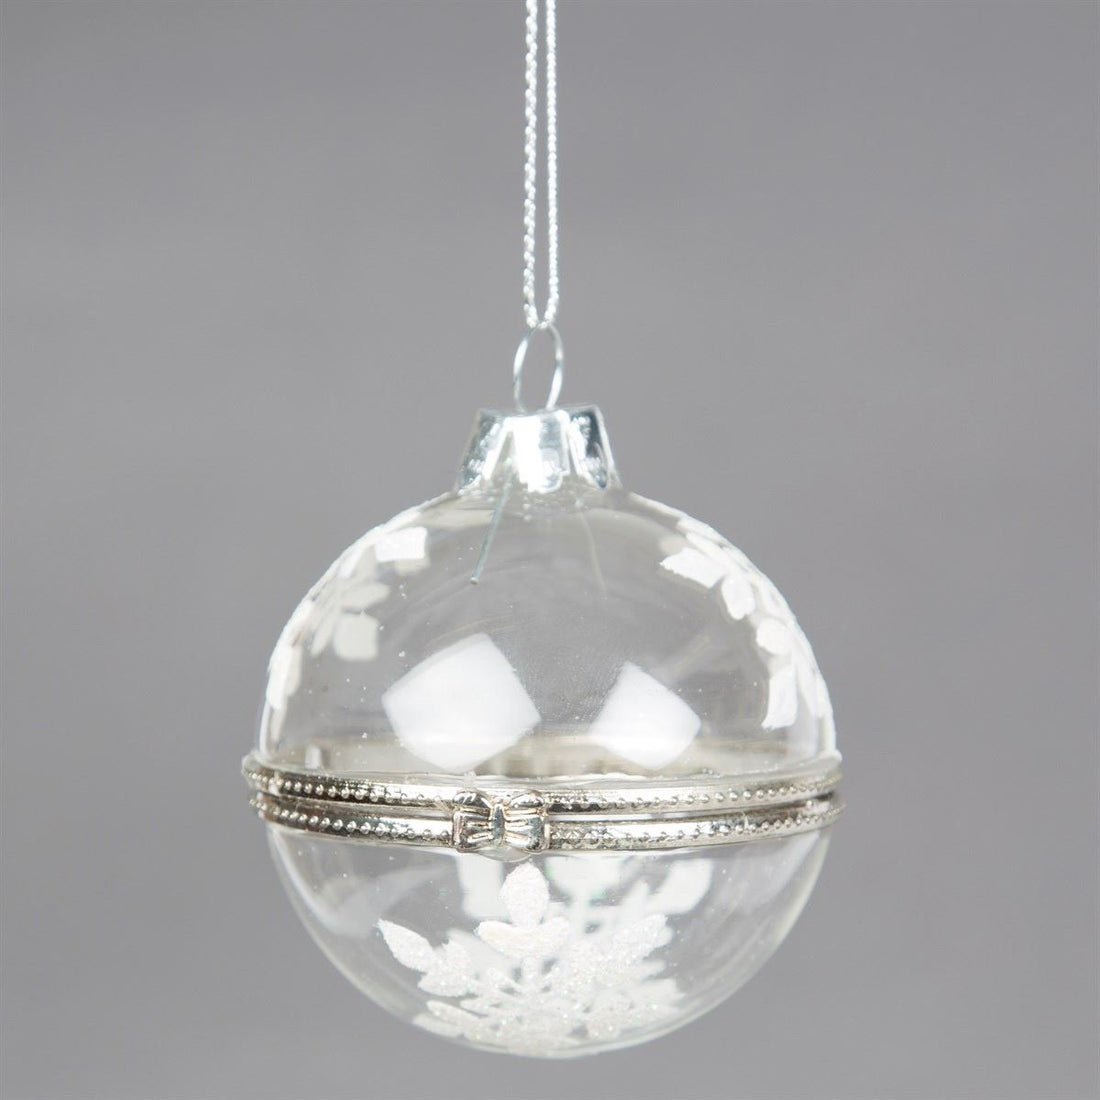 rjb-stone-imperial-snowflake-bauble-clear- (3)